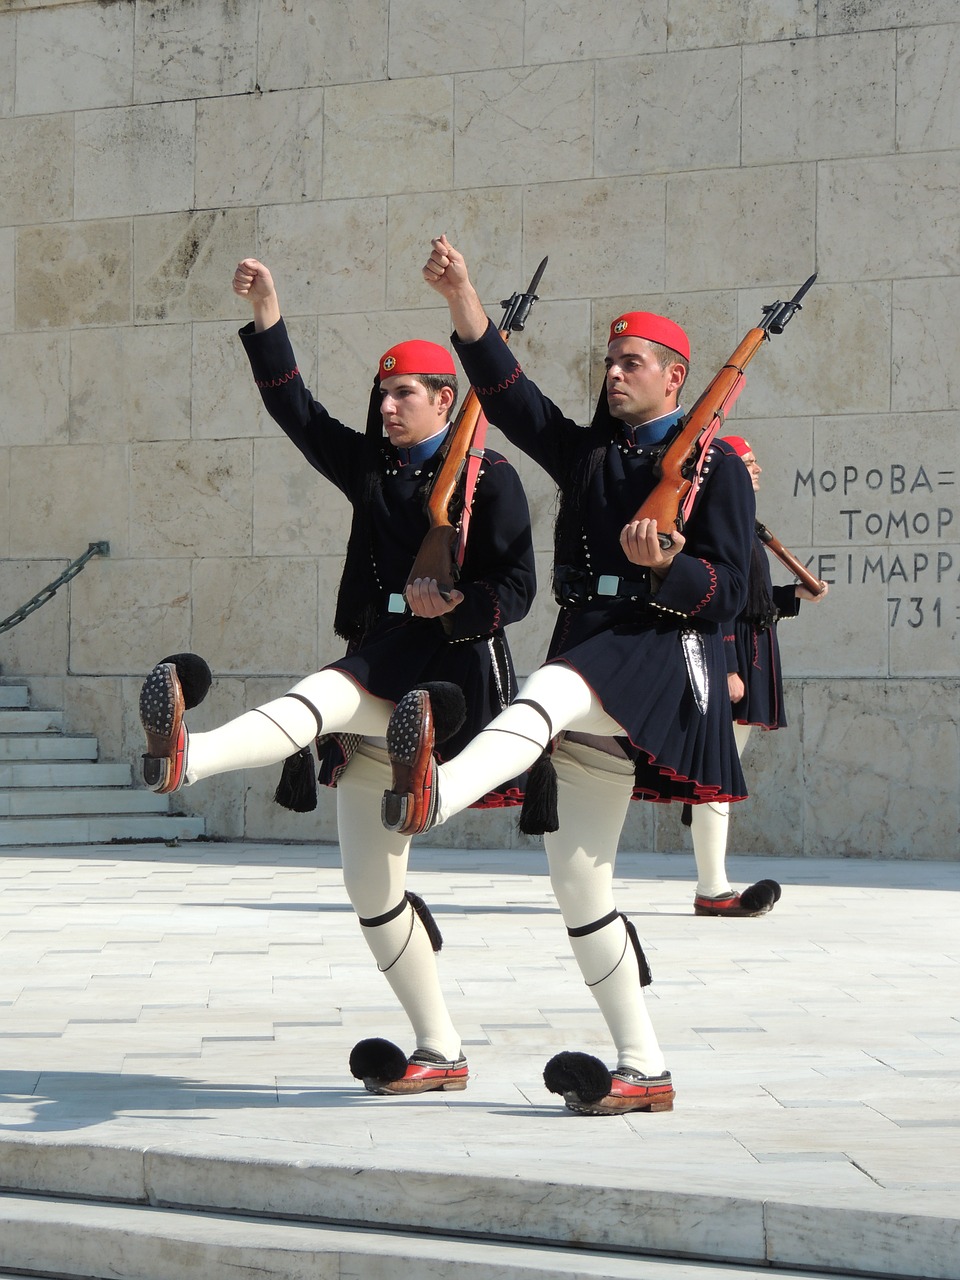 goose-step residential guard athens free photo